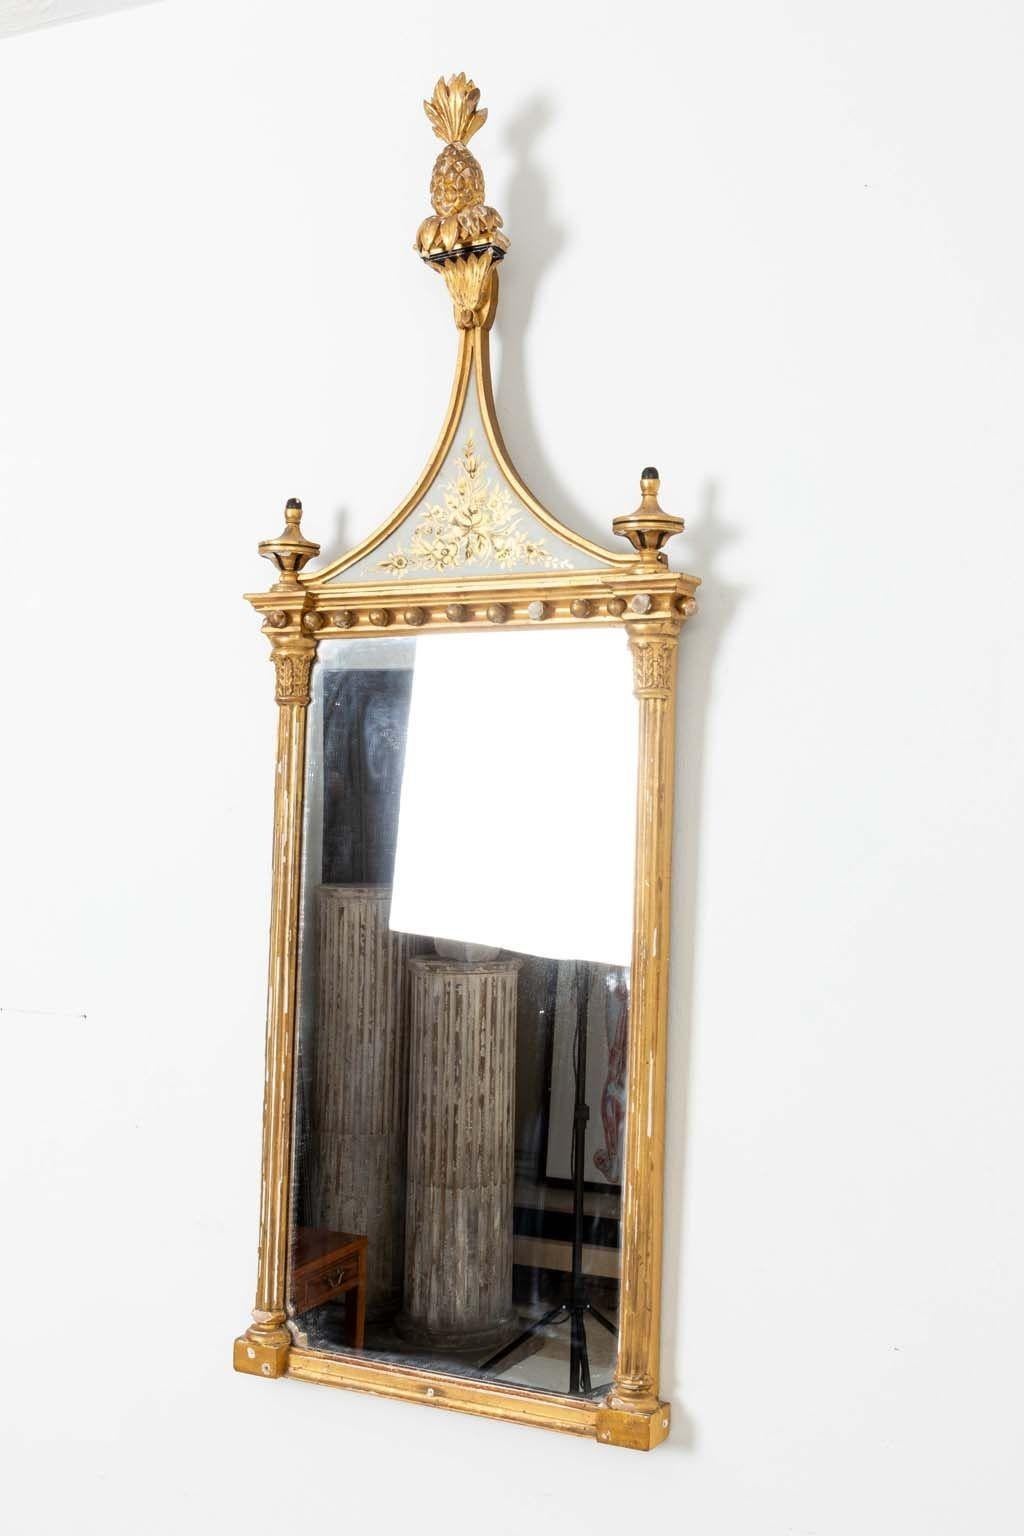 Federal Style Gilt Framed Mirror with Pineapple Finial, Early 20th C. American For Sale 2